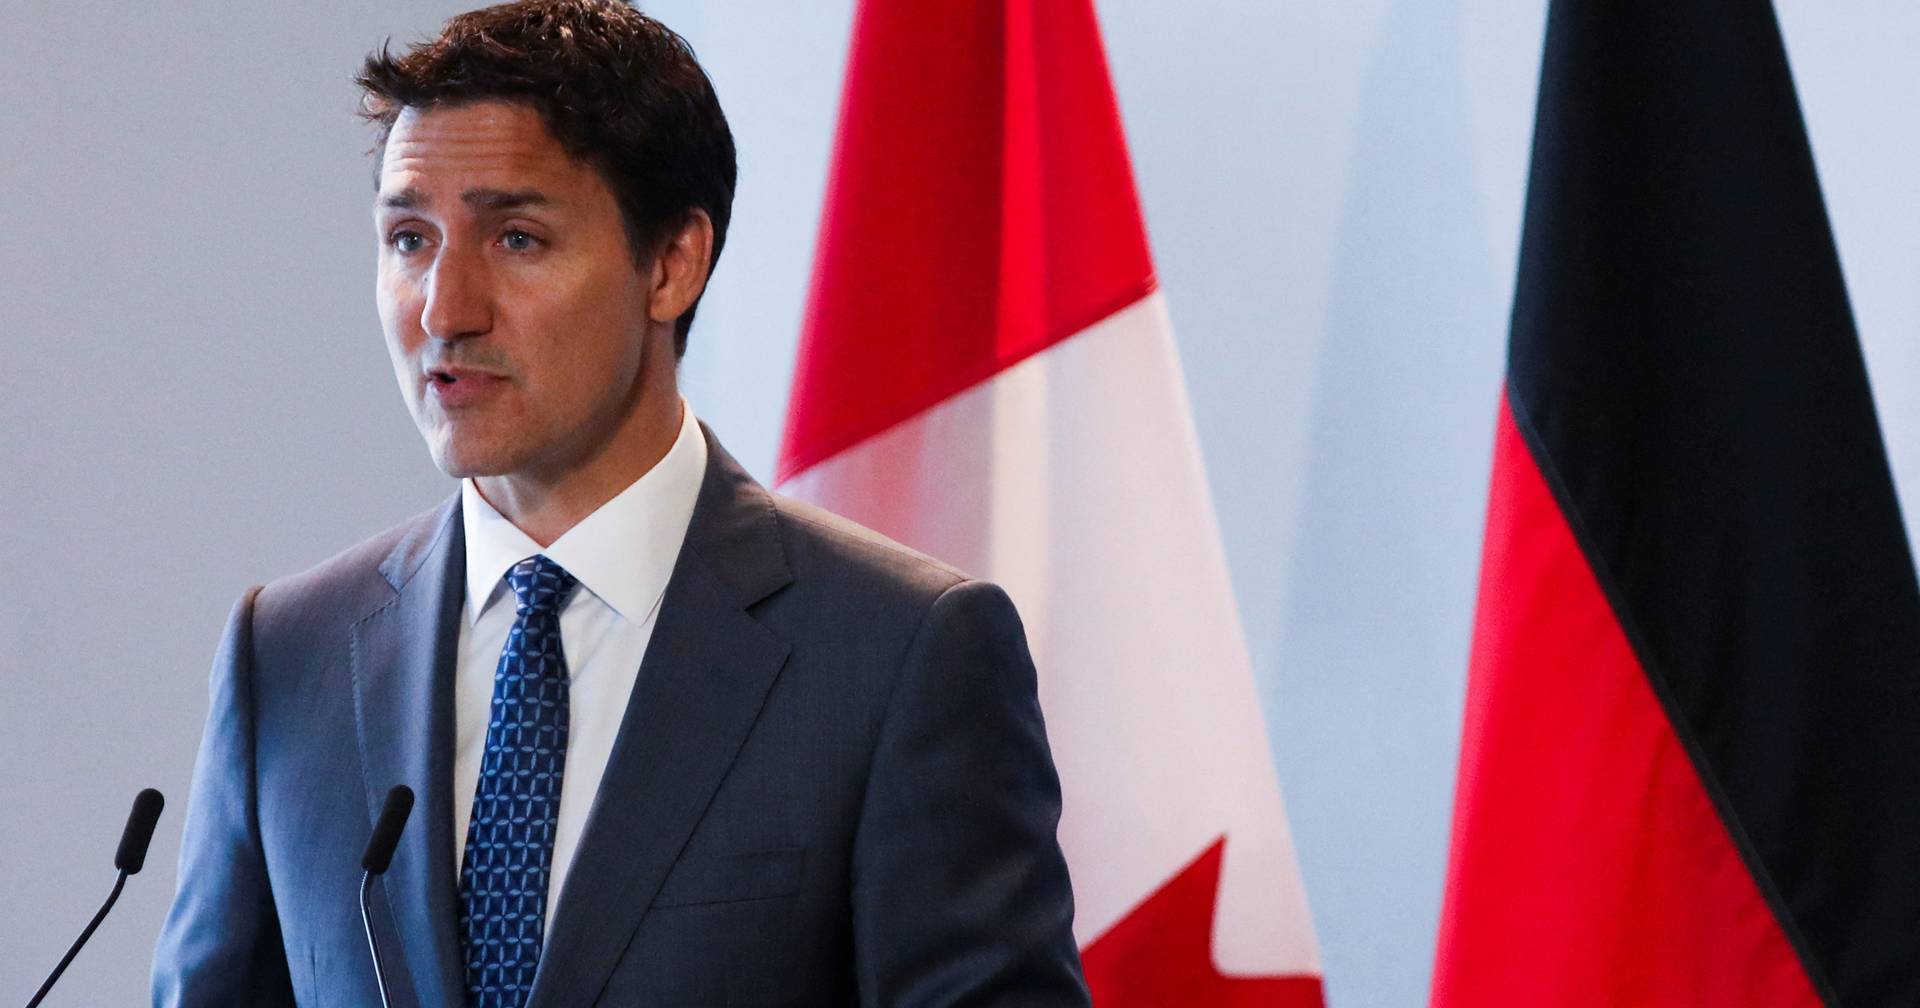 “Aggressive play”: Trudeau accused China of trying to undermine Canadian democracy